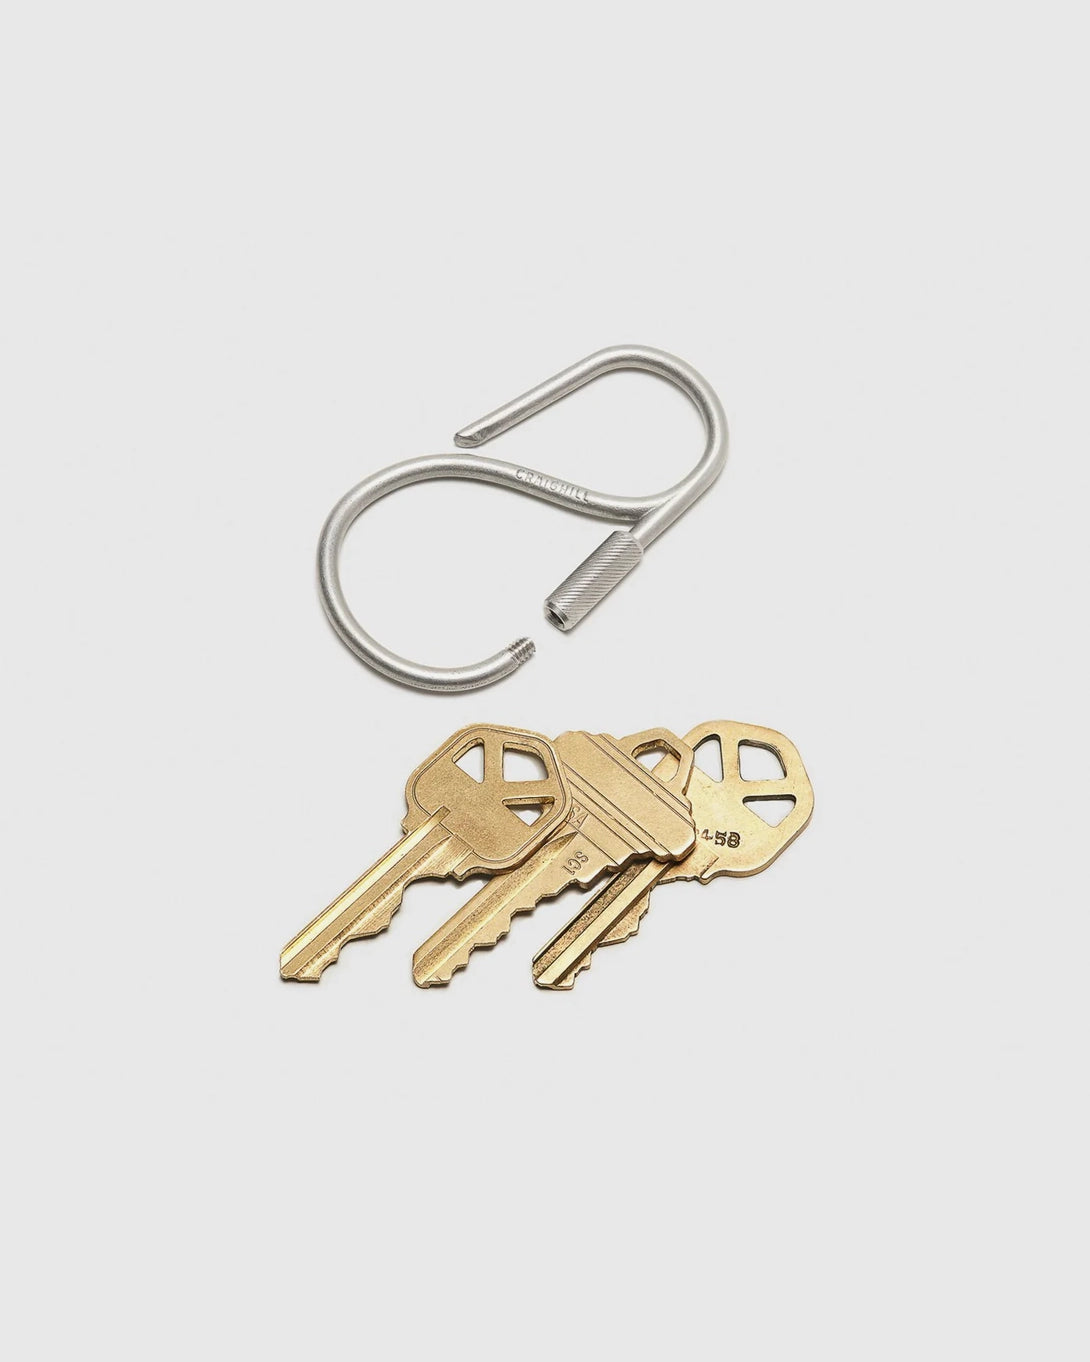 Stainless Steel Offset Keyring Utility Accessory